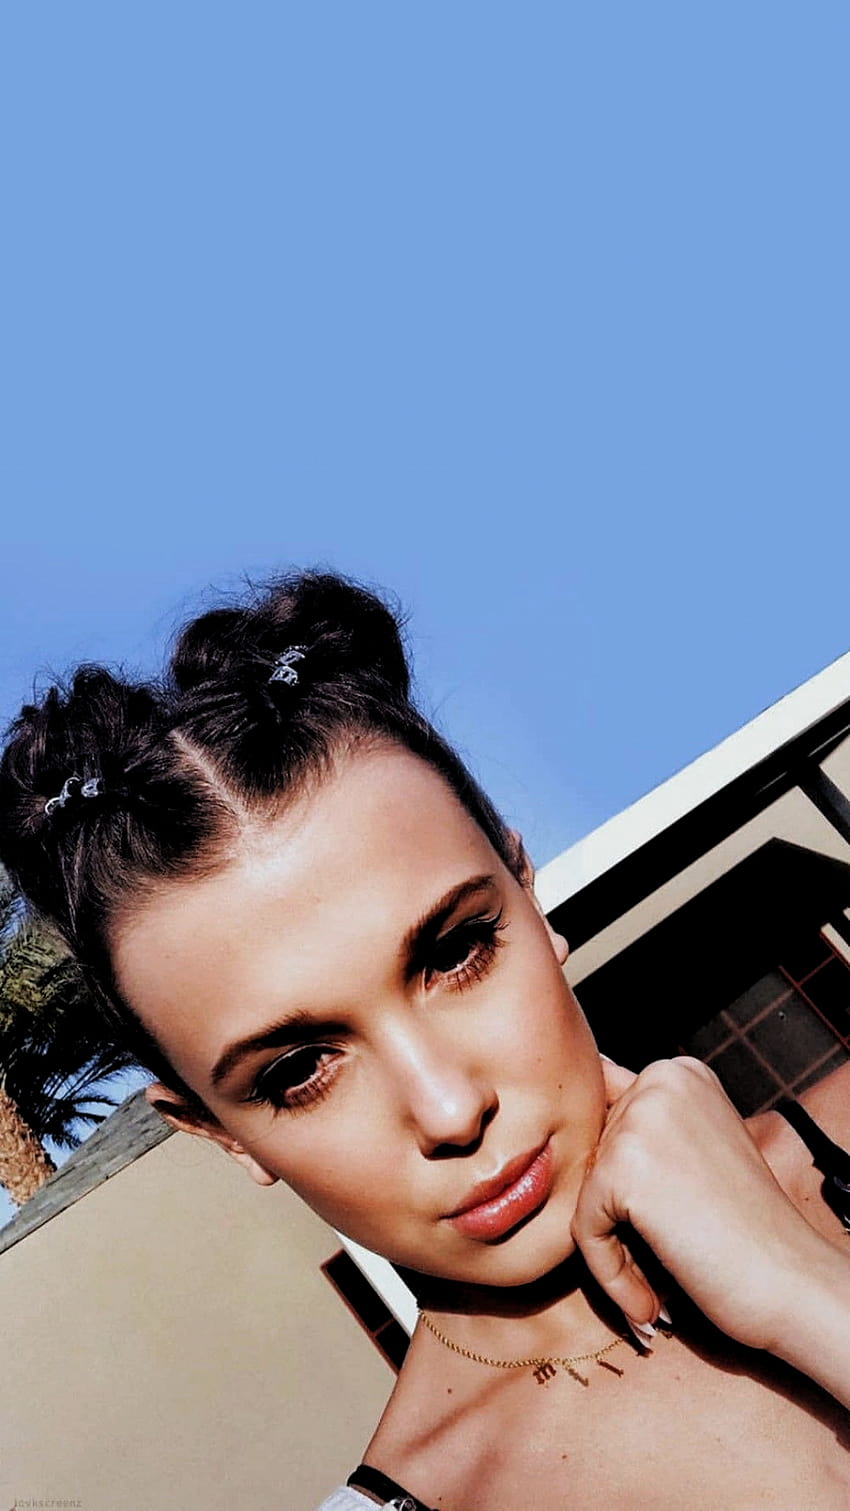 Pin on Millie bobby brown